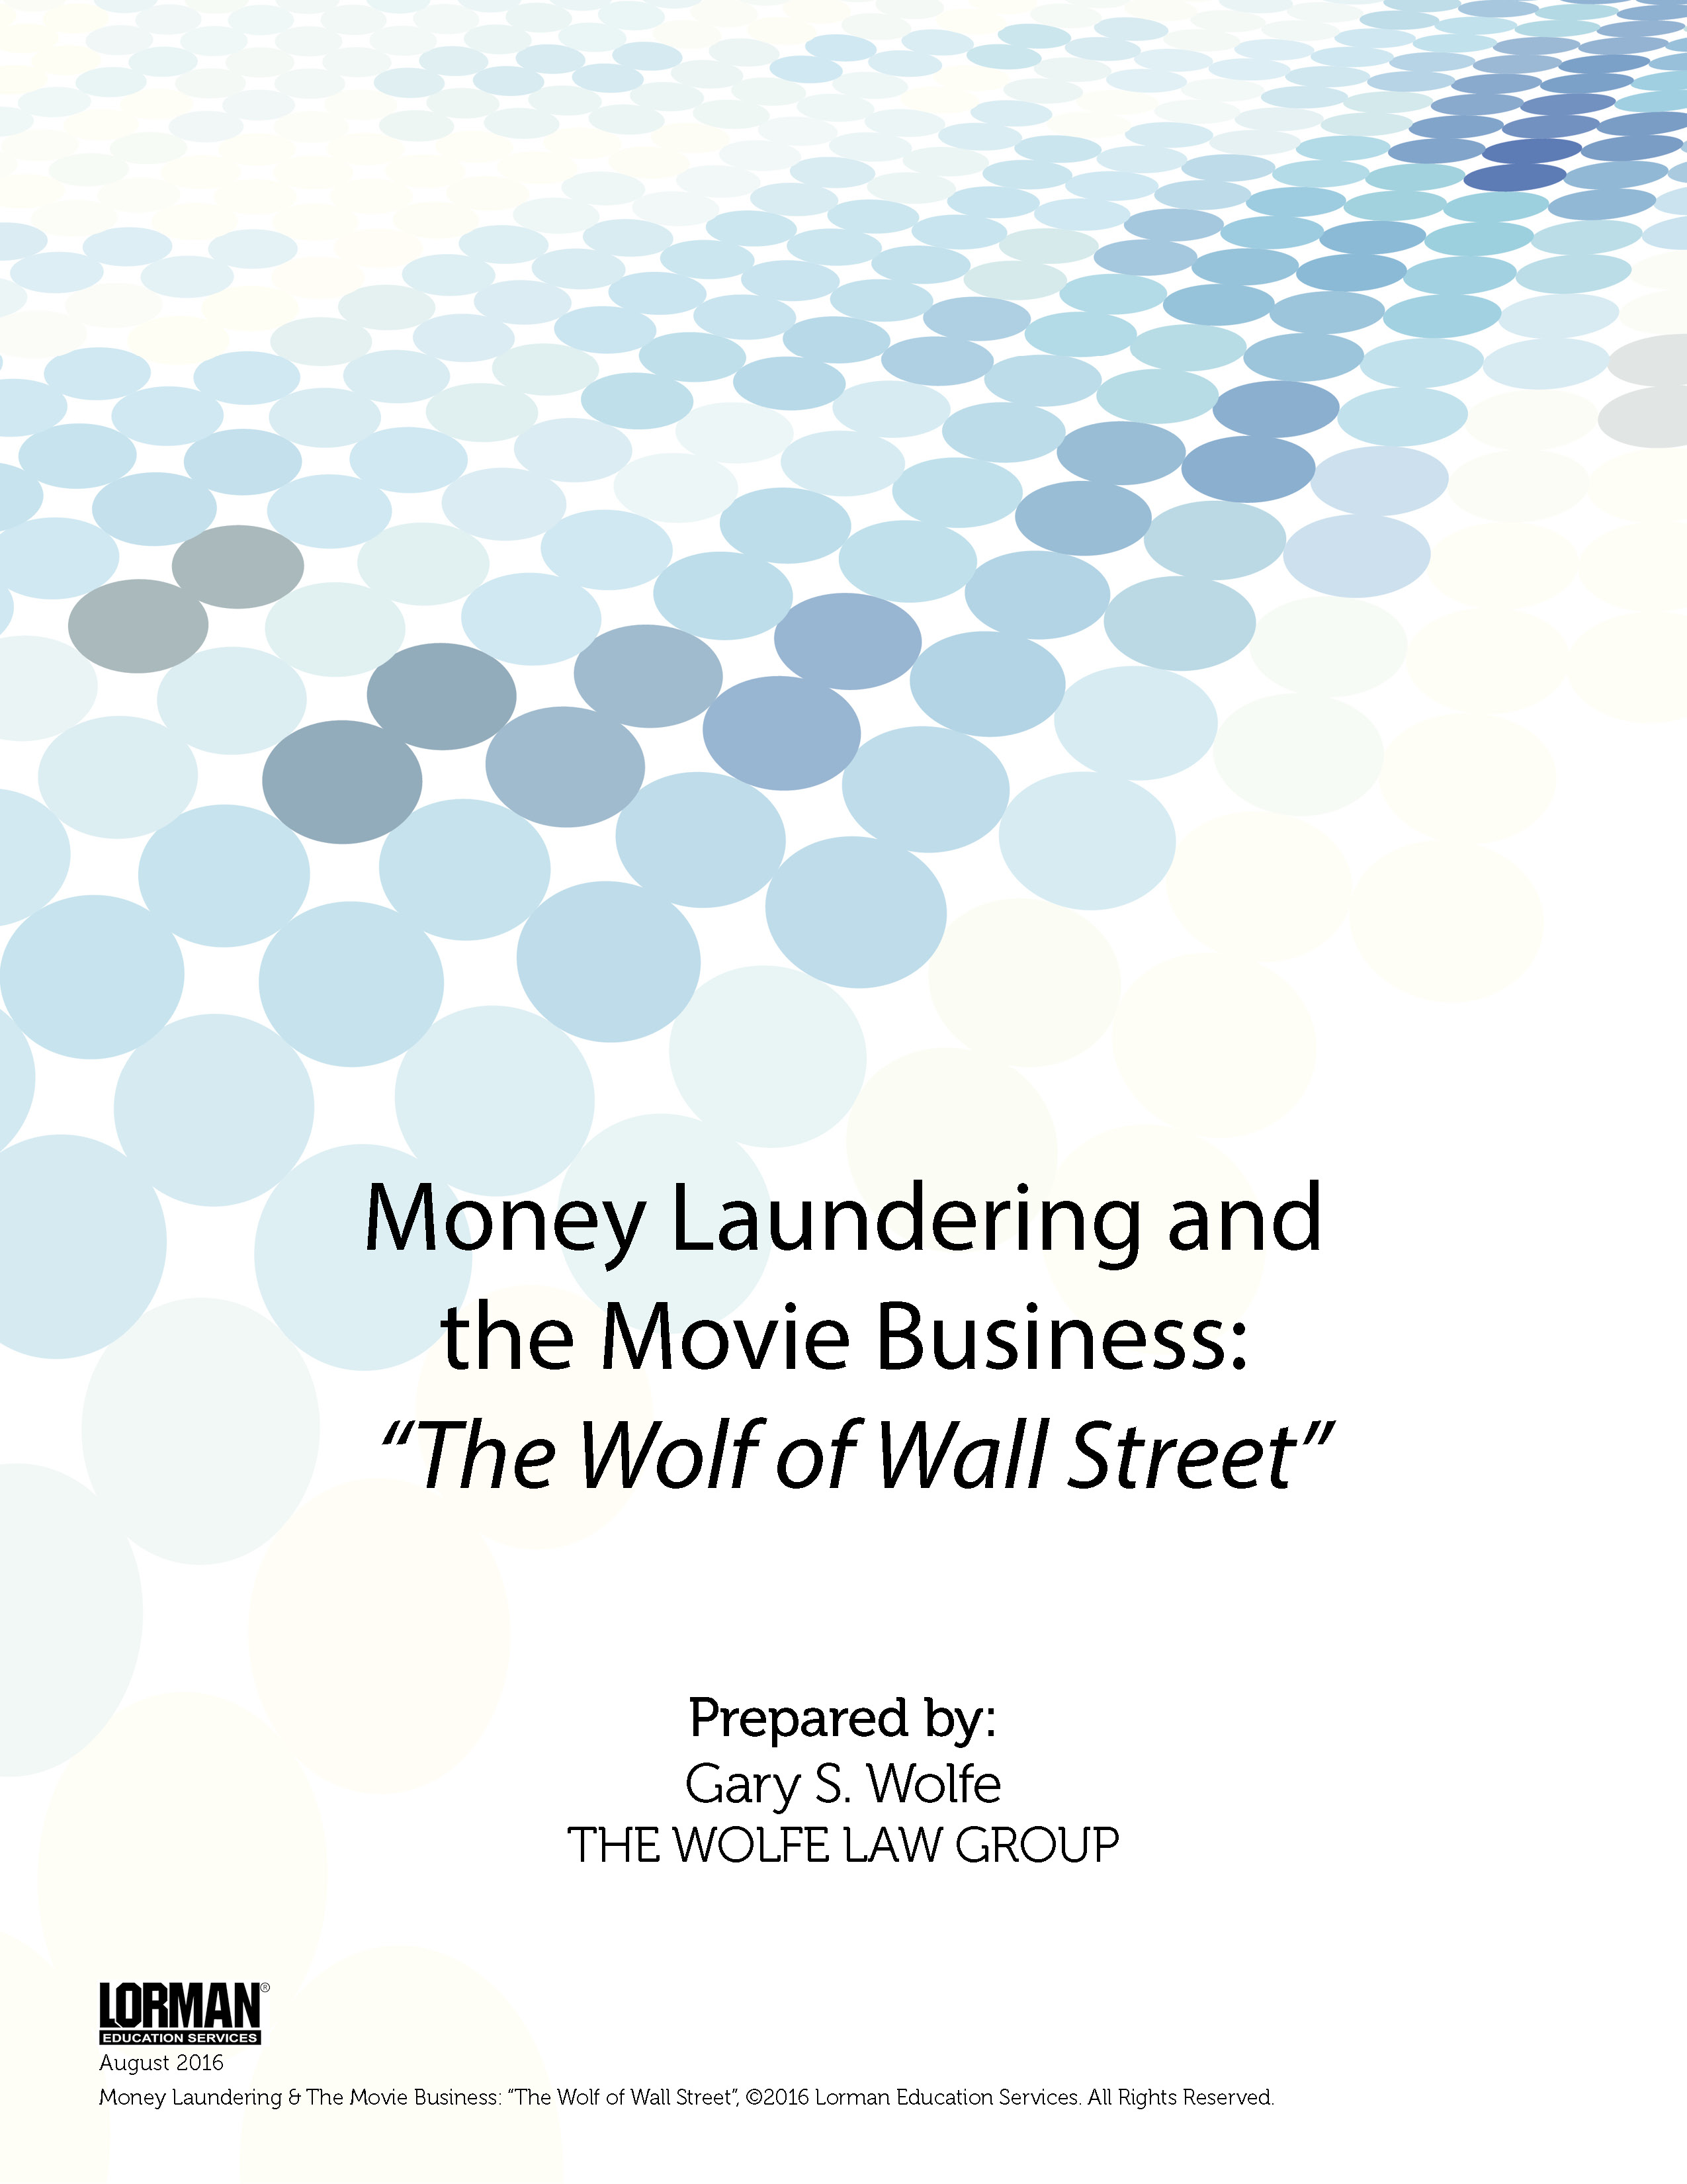 Money Laundering & The Movie Business - The Wolf of Wall Street